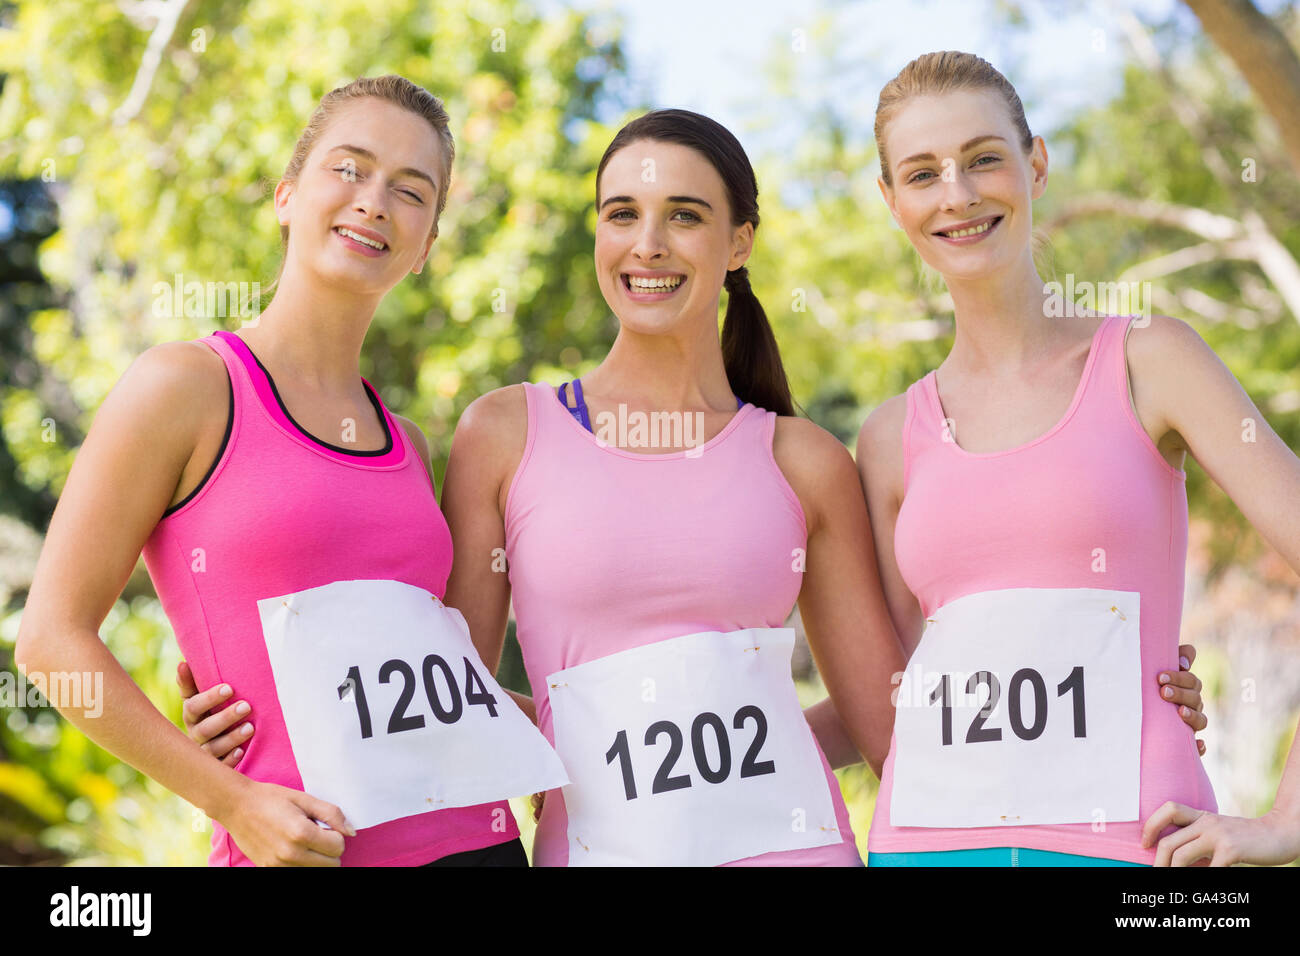 Portrait of young athlete women posing Stock Photo